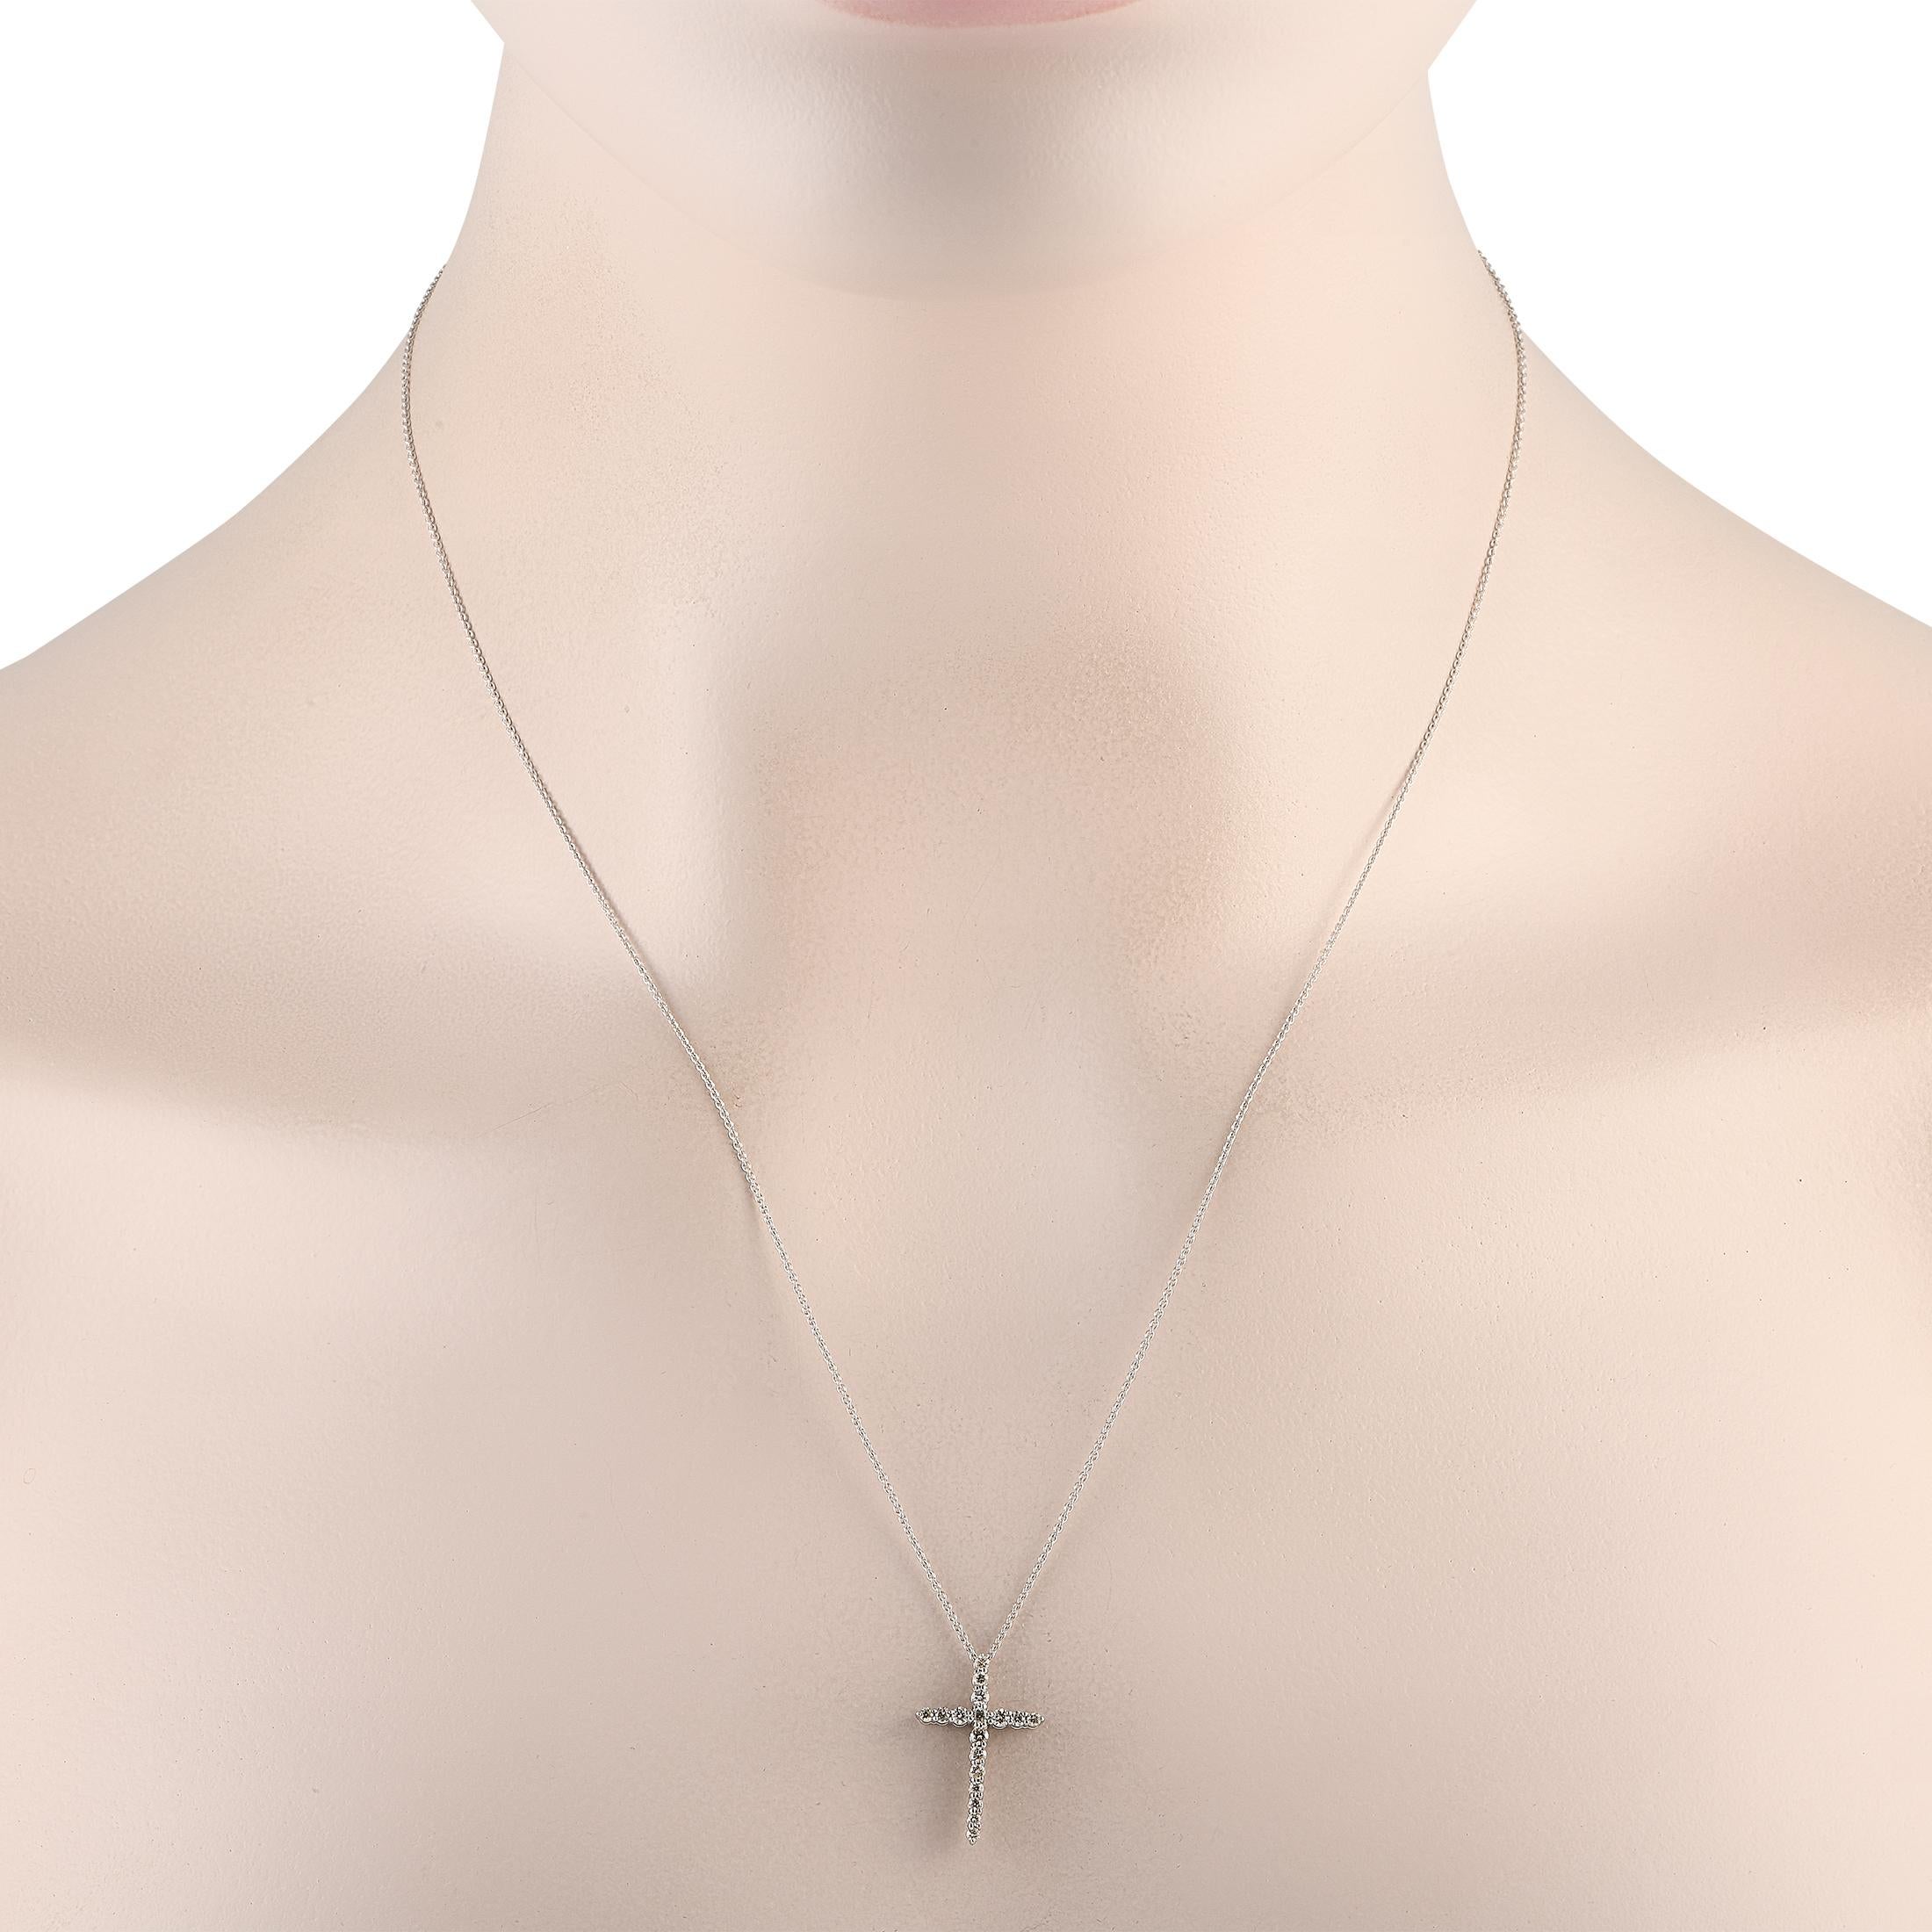 Perfect for daily wear, this symbol of spirituality is expertly crafted in extremely durable and corrosion-resistant 950 platinum. The cross pendant, held by a barely there chain, is fully lined with petite round diamonds. With a subtle sparkle and